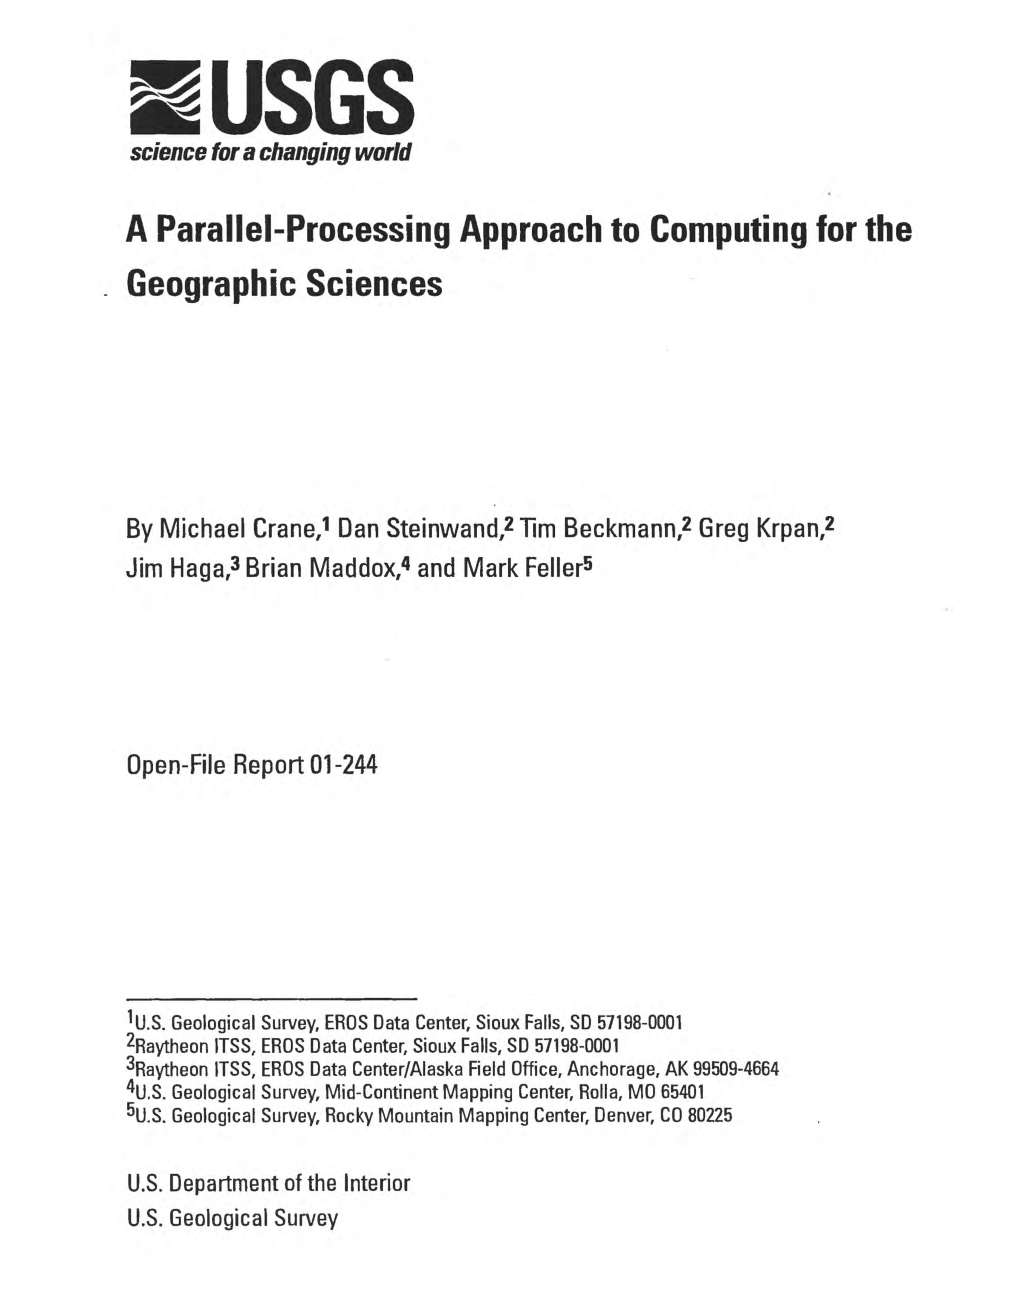 A Parallel-Processing Approach to Computing for the Geographic Sciences